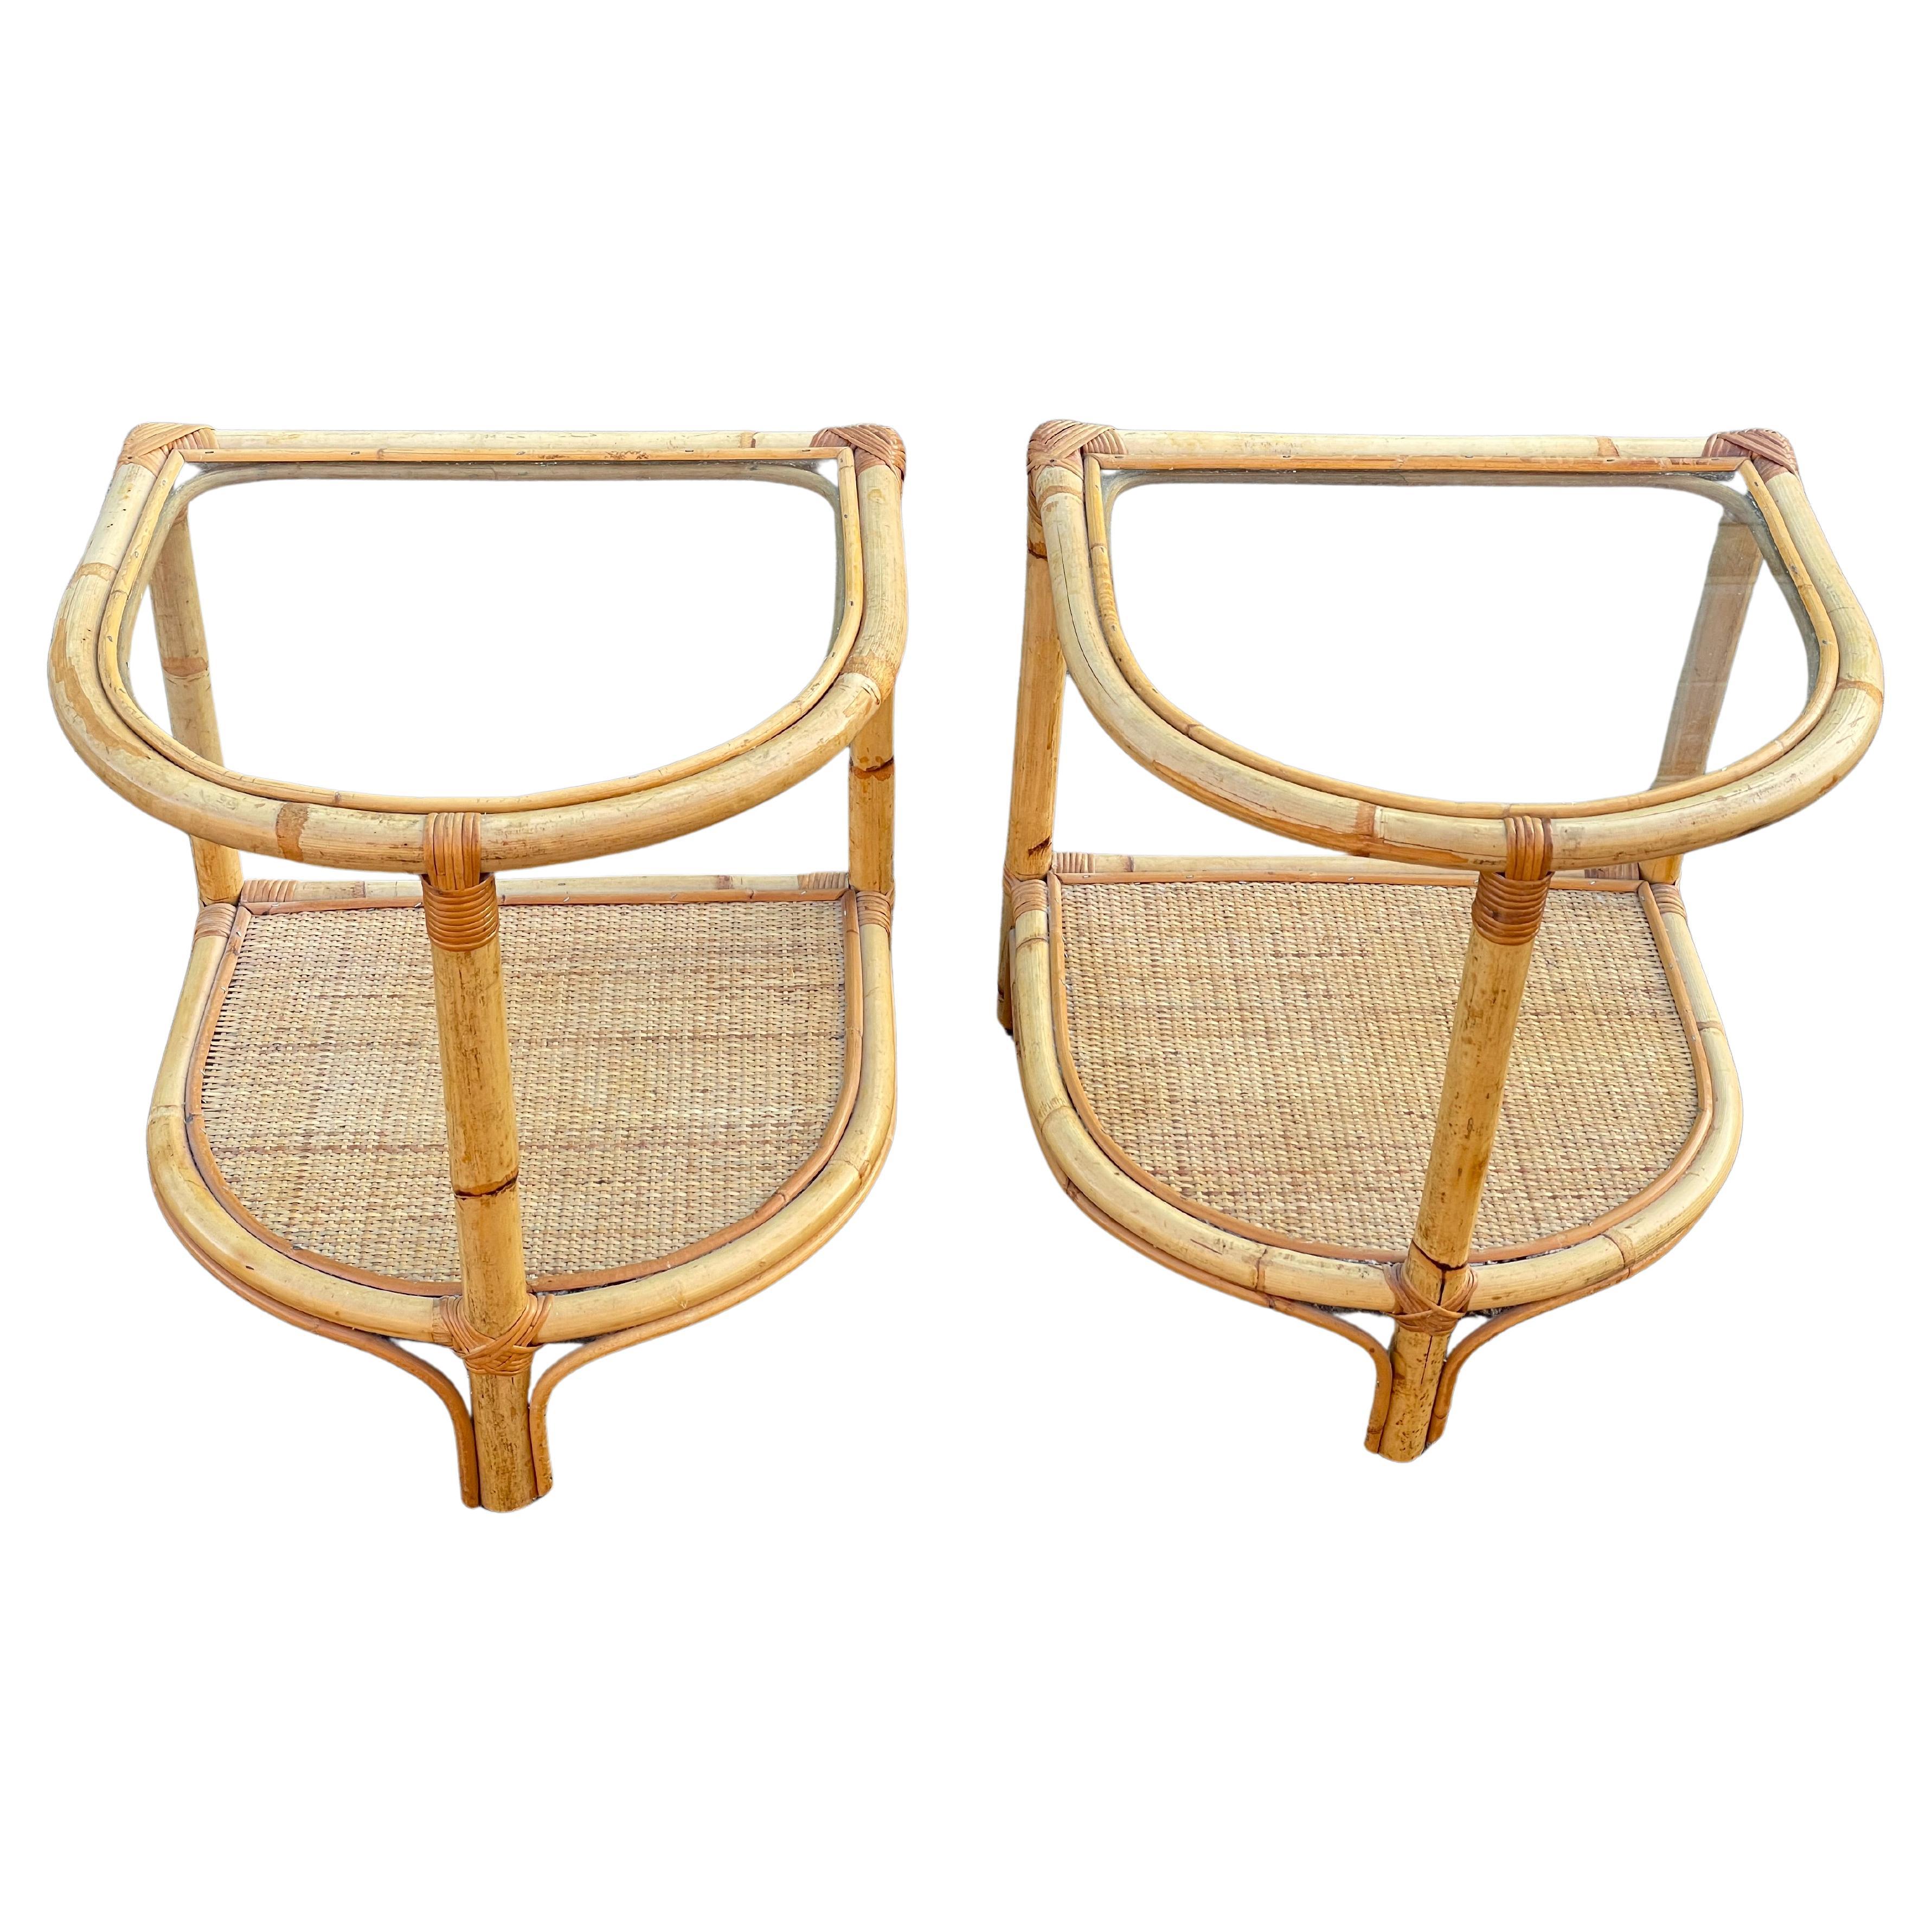 Mid-Century Modern Vintage bamboo rattan nightstands, crafted in Denmark during the 1970s